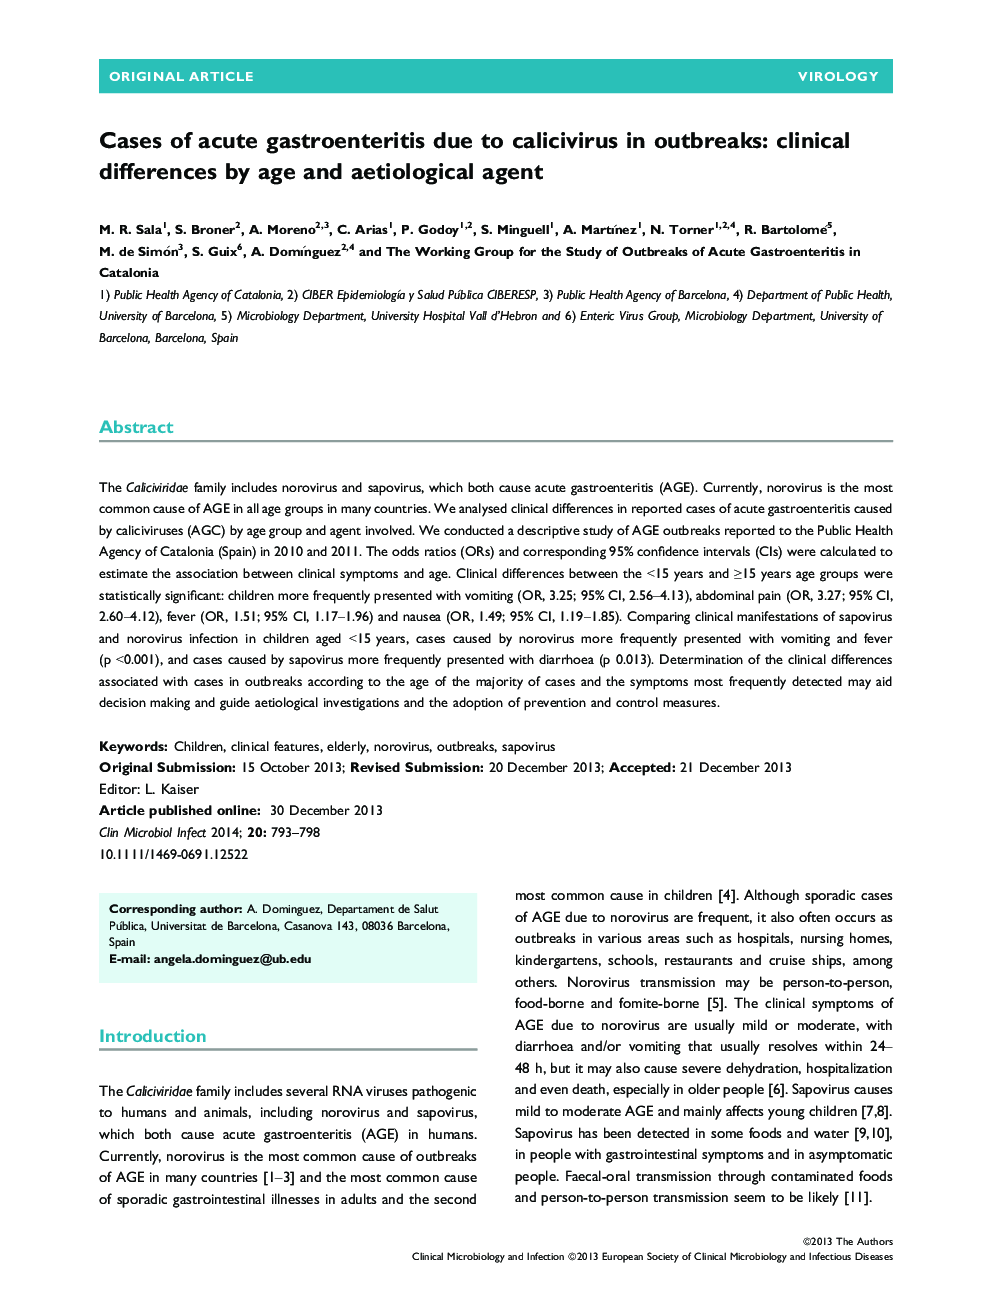 Cases of acute gastroenteritis due to calicivirus in outbreaks: clinical differences by age and aetiological agent 